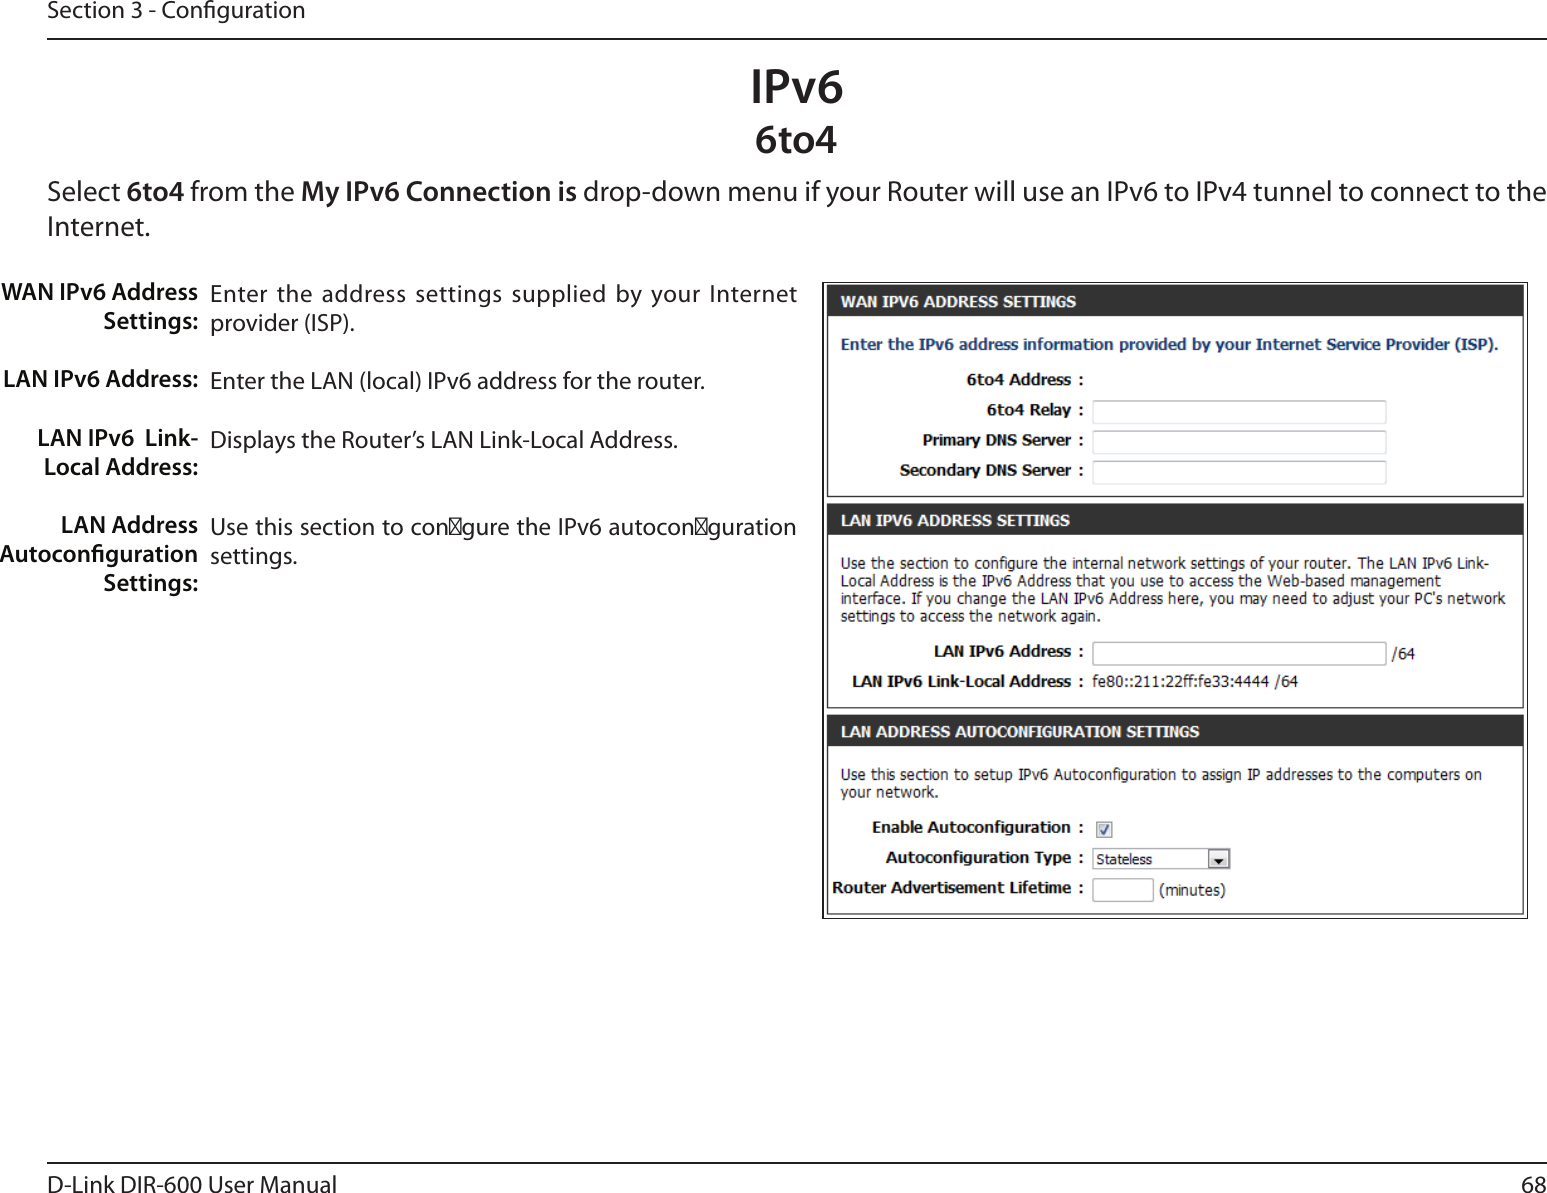 68D-Link DIR-600 User ManualSection 3 - CongurationIPv66to4Select 6to4 from the My IPv6 Connection is drop-down menu if your Router will use an IPv6 to IPv4 tunnel to connect to the Internet.Enter the address settings supplied by your Internet provider (ISP). Enter the LAN (local) IPv6 address for the router. Displays the Router’s LAN Link-Local Address.Use this section to con餀gure the IPv6 autocon餀guration settings.WAN IPv6 Address Settings:LAN IPv6 Address:LAN IPv6  Link-Local Address:LAN Address Autoconguration Settings: